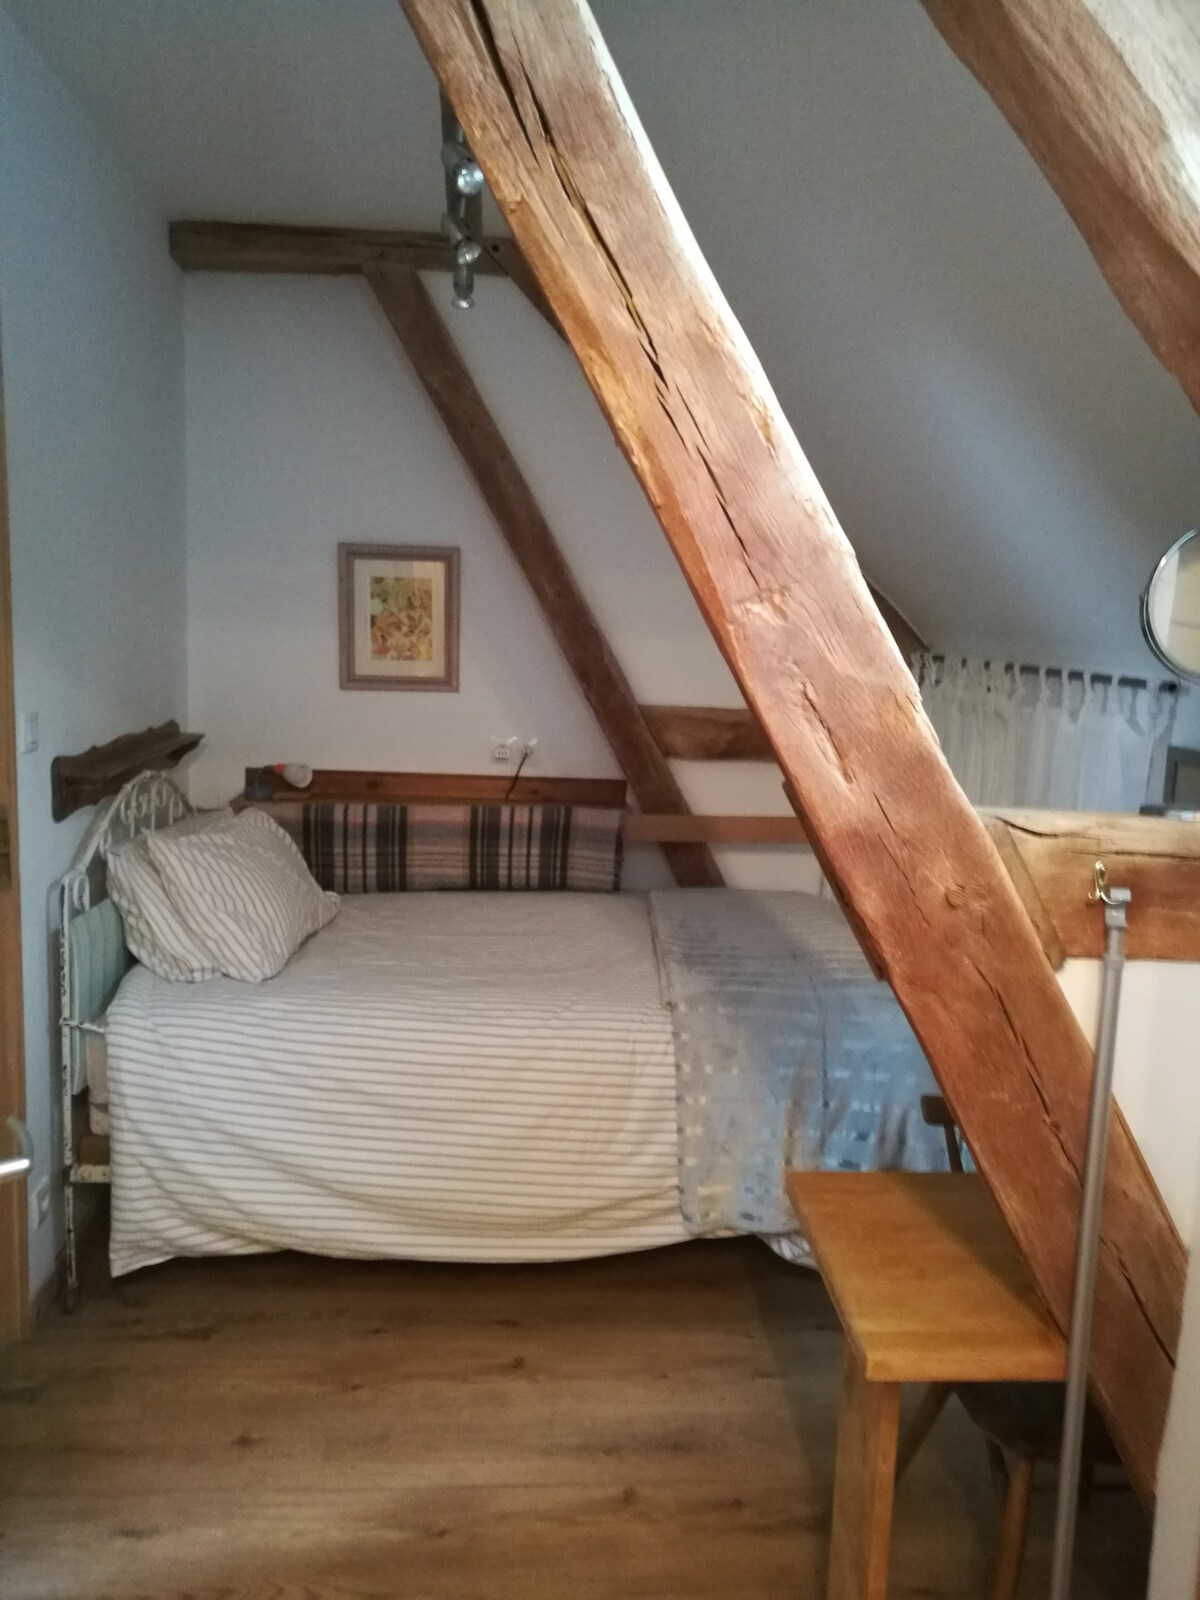 Cute 1 bed space in an old barn.